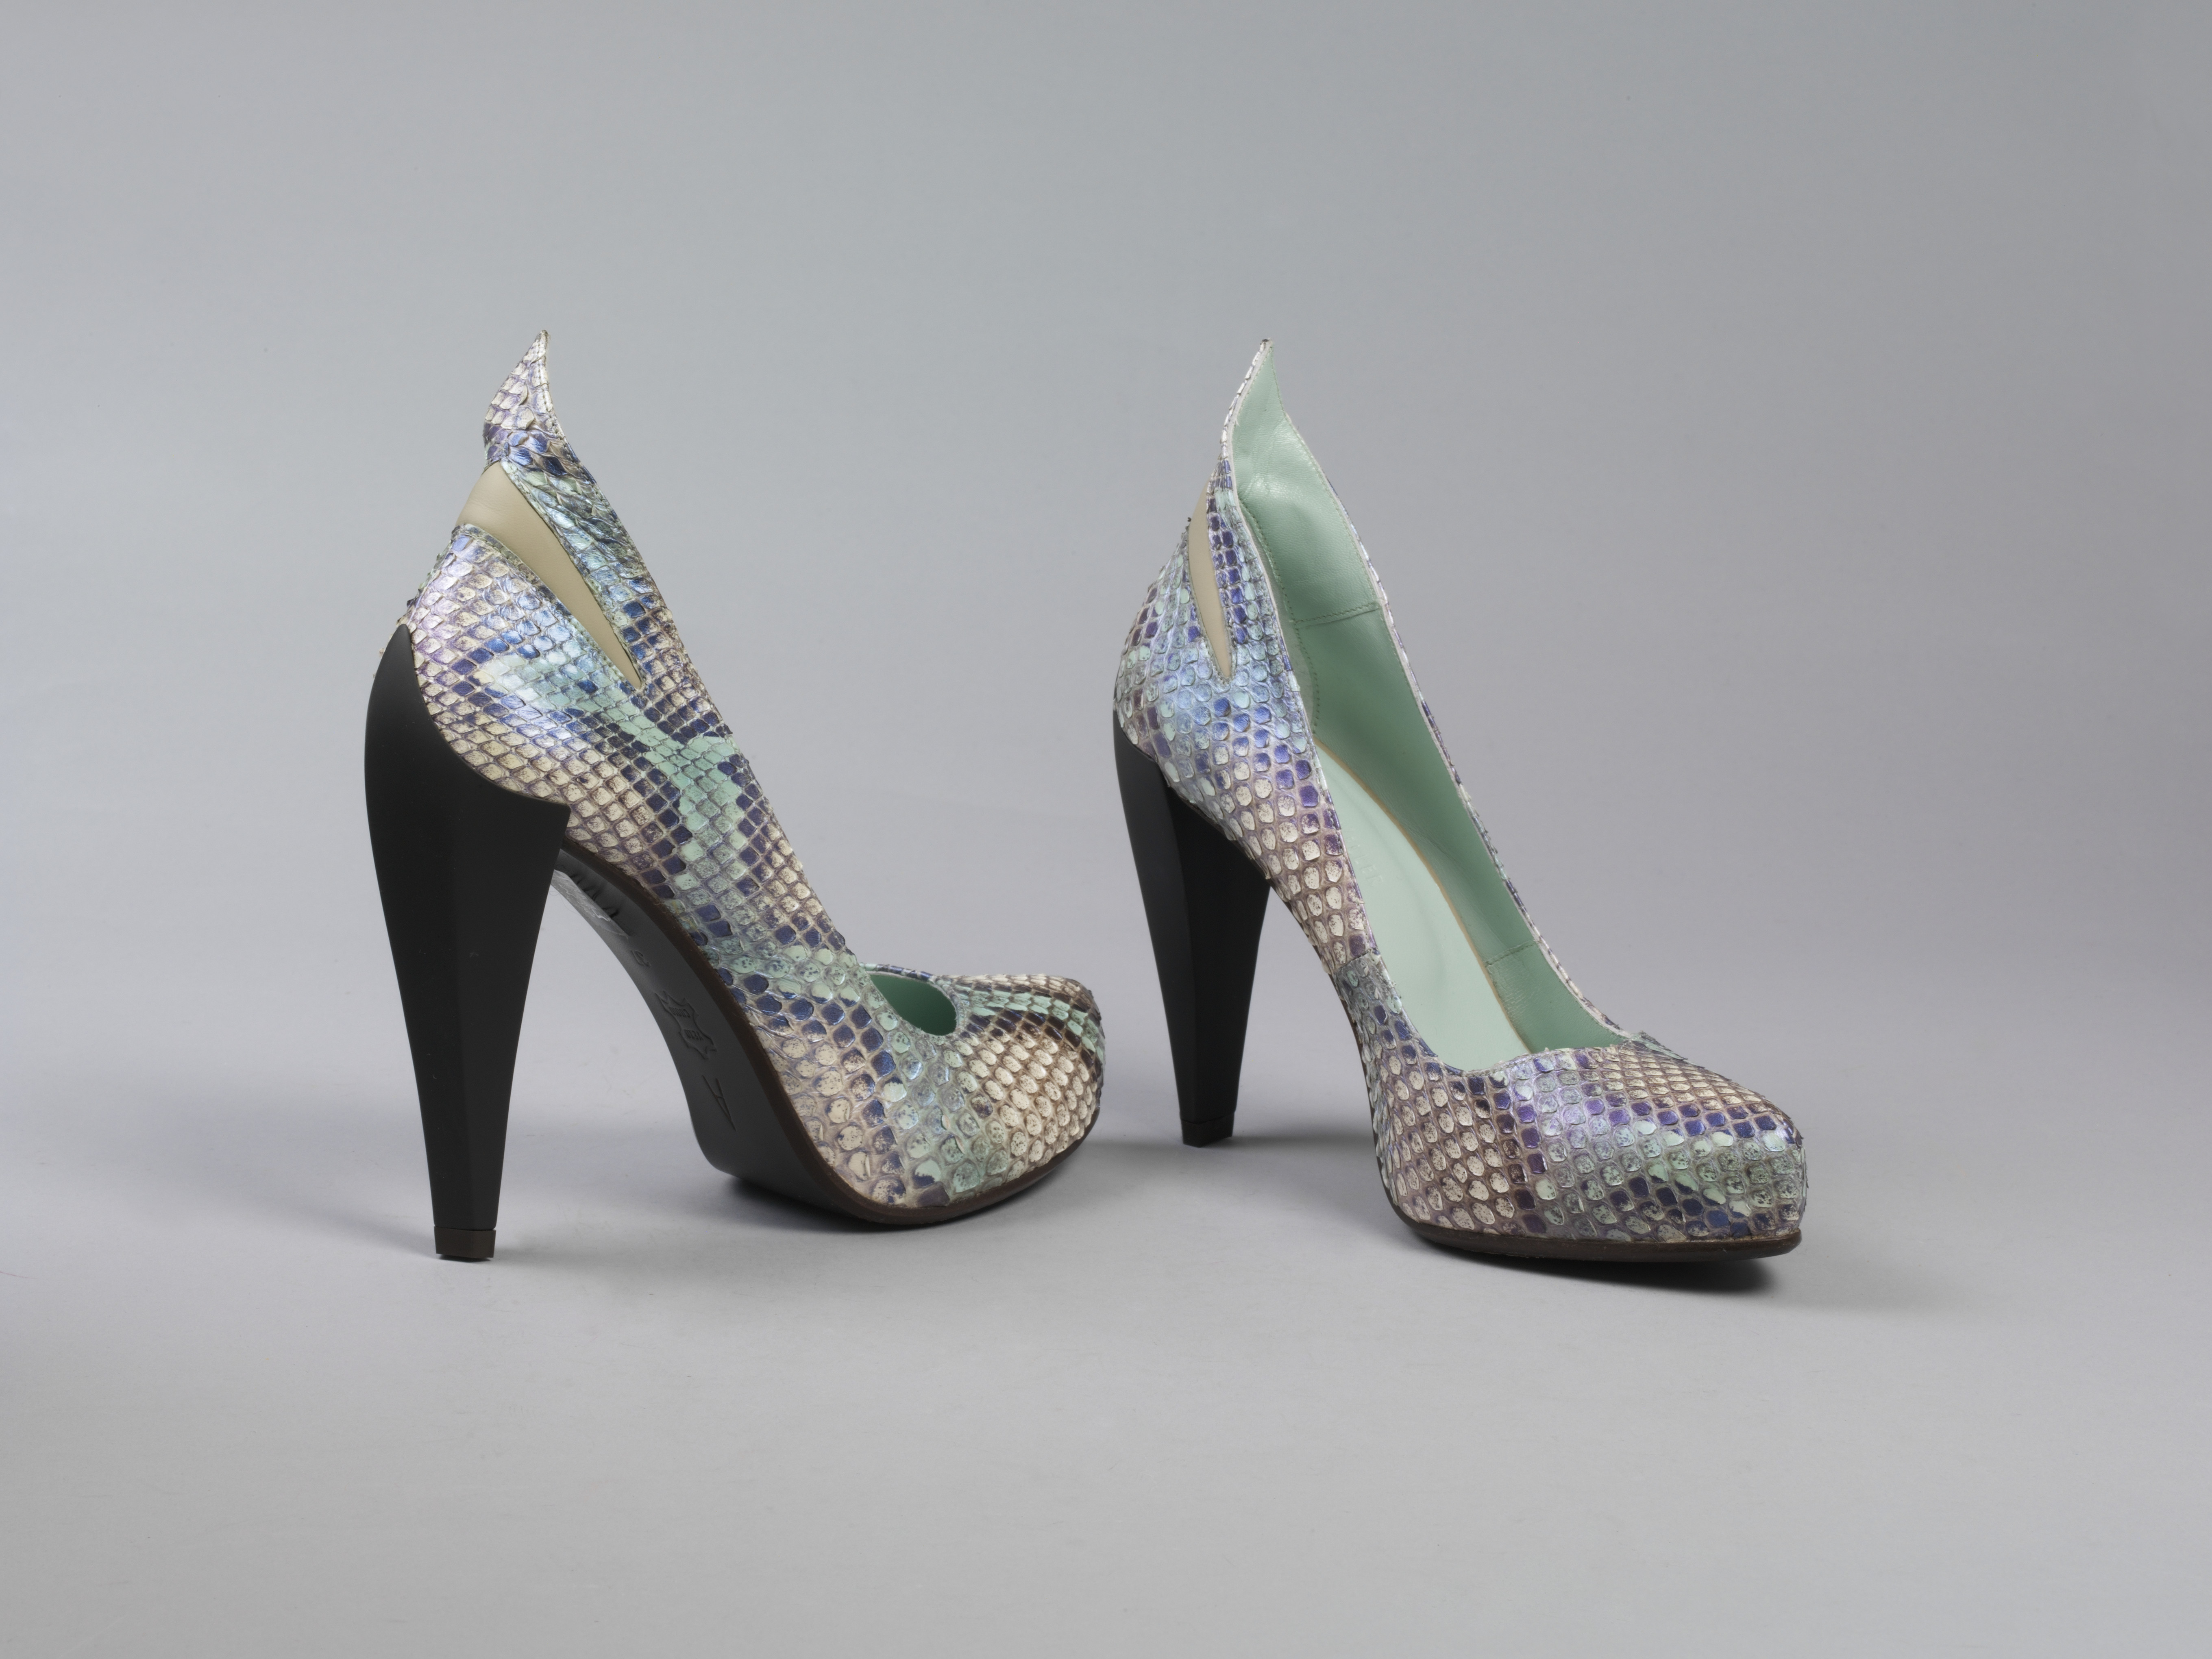 Pair of shoes, turquoise snake skin high heels, 'Spock A3', S/S 2010, Atalanta Weller, designed in Great Britain, made in Portugal, 2010.